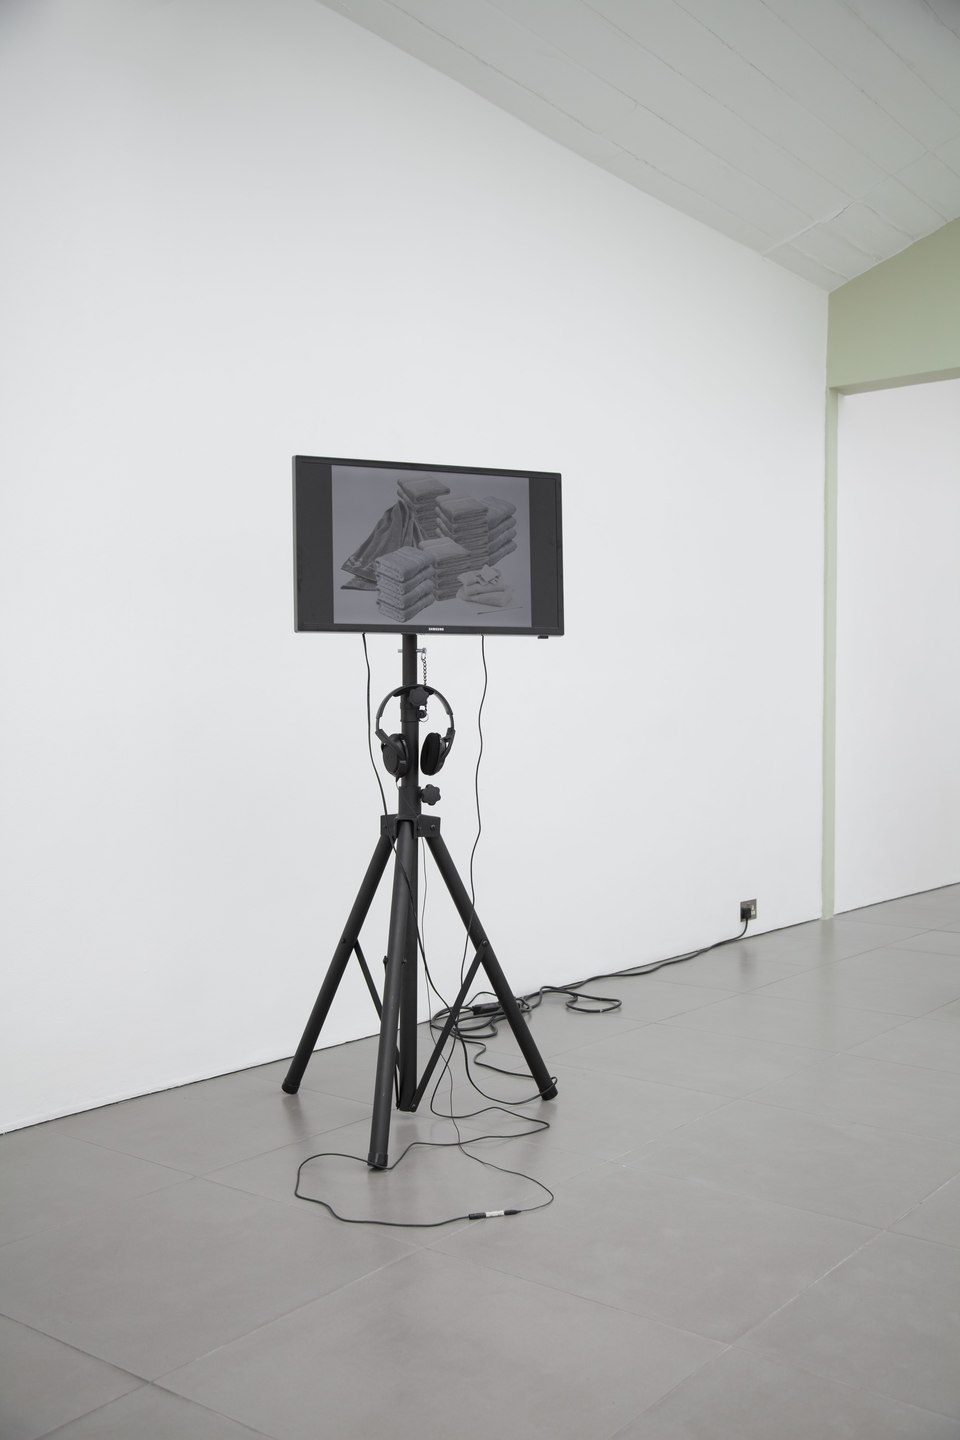 Rachel Reupke, Containing Matters Of No Very Peaceable Colour, 2009, video still, HD video, duration 5:18 mins, Cell Project Space